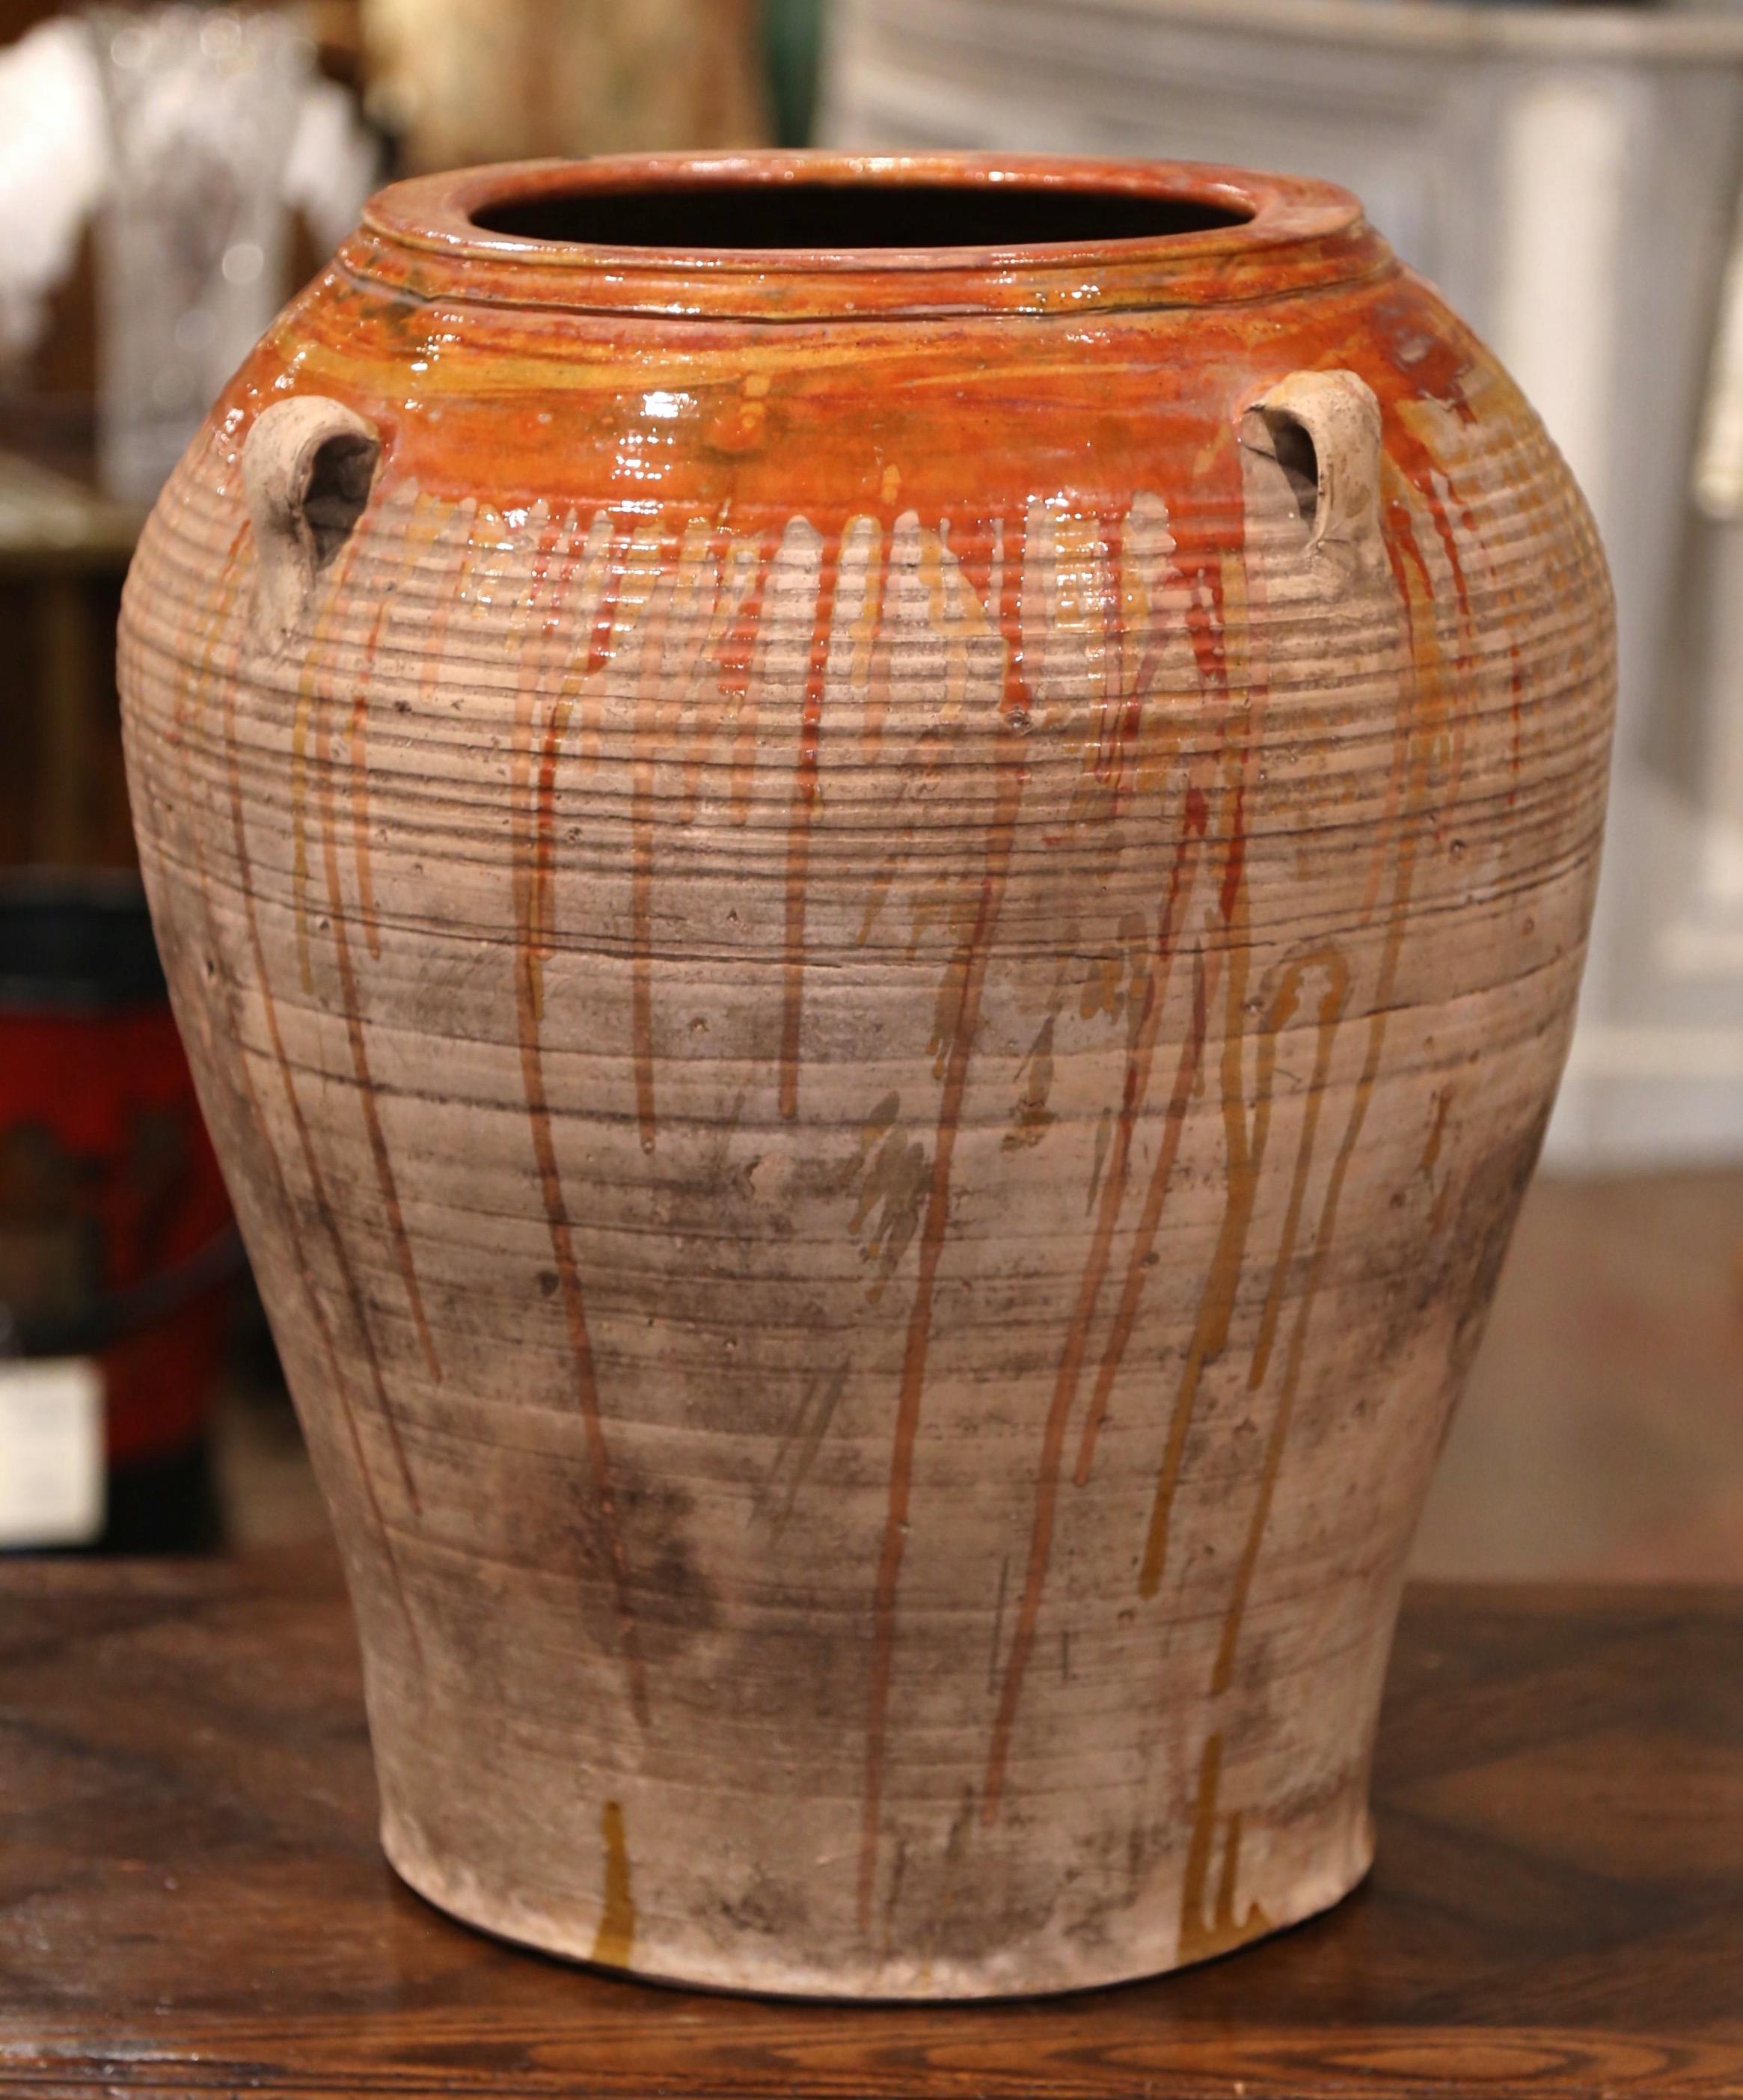 This large, antique earthenware jar was hand made in Southern France, circa 1870. Built of blond clay, the terracotta pot is round in shape with a tapered base decorated with four handles at the top; the olive jar is embellished with a mustard glaze